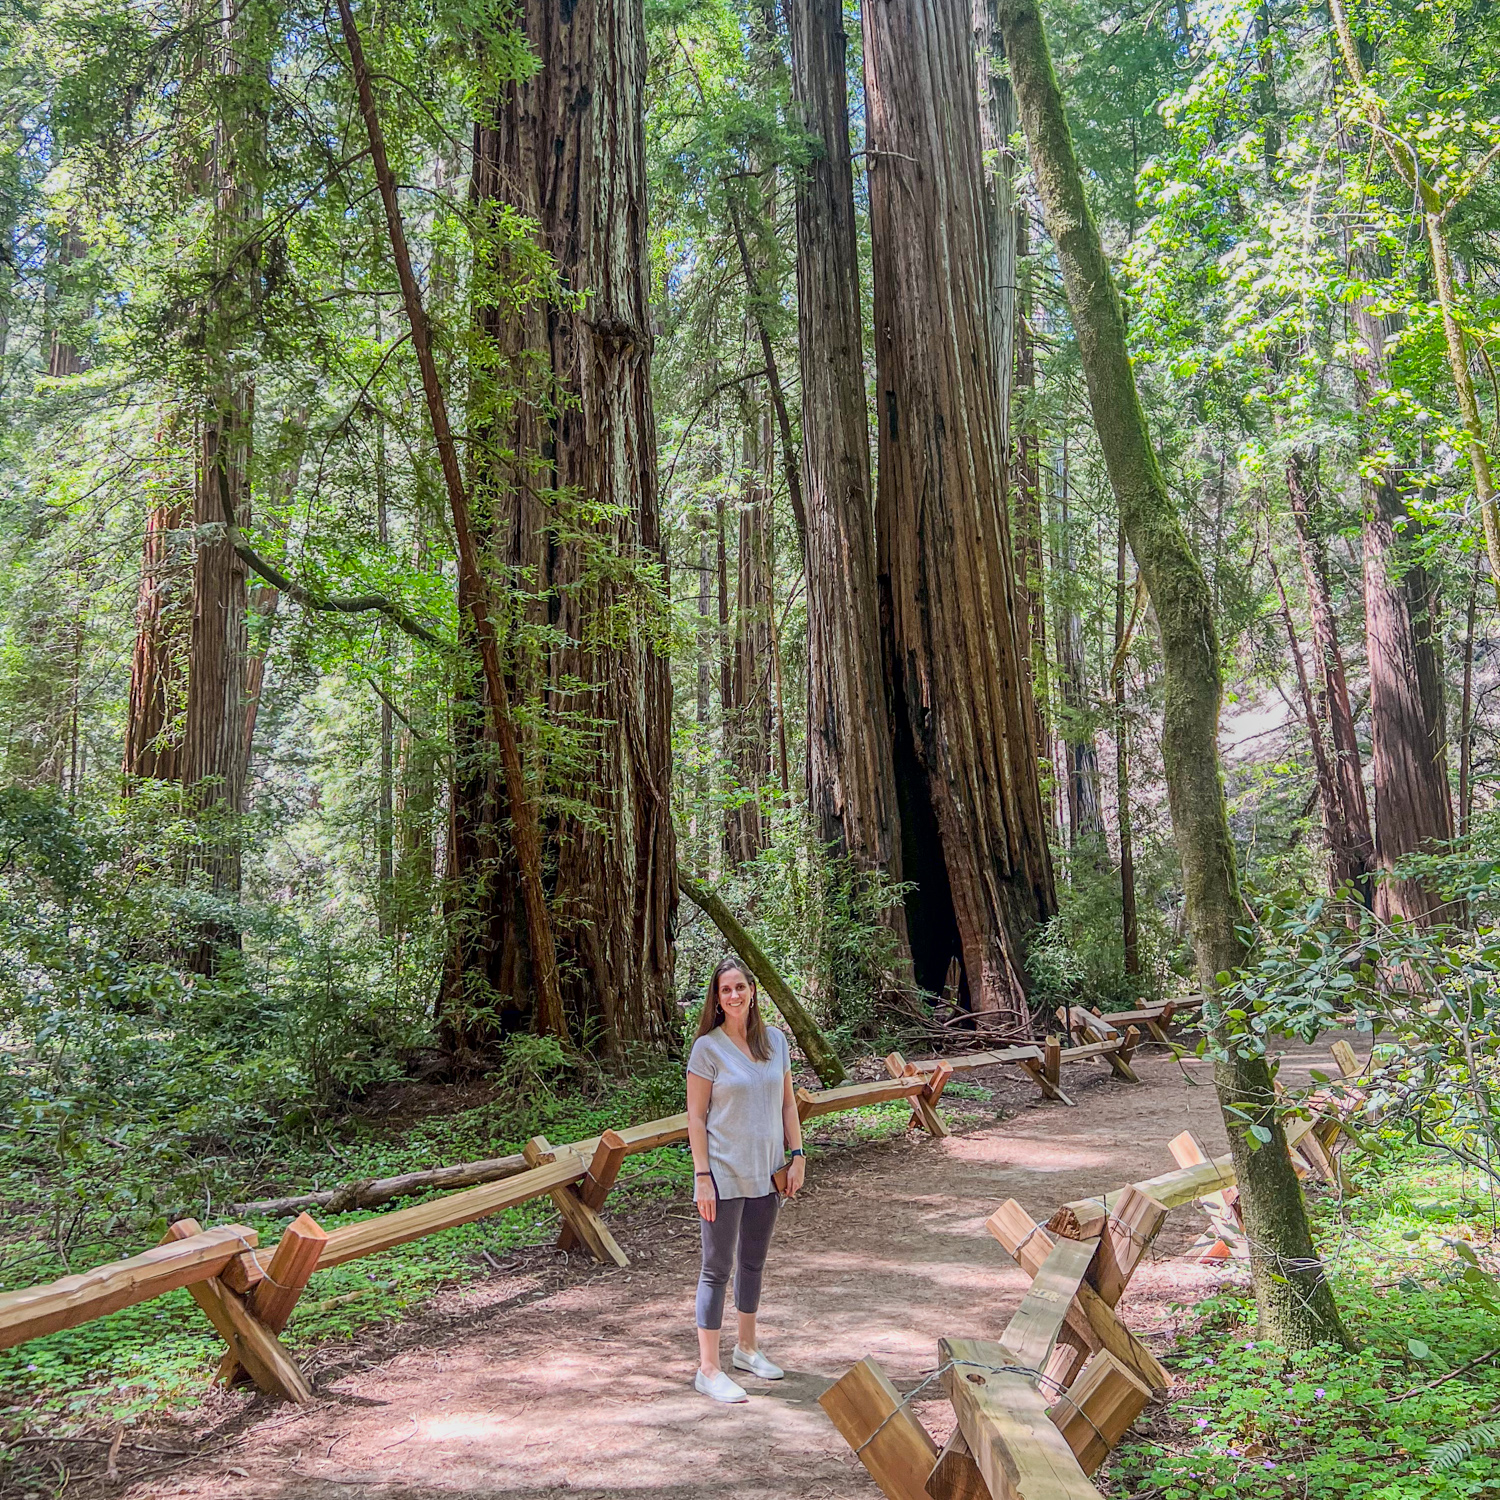 Kel on the trail, among the Armstrong redwoods